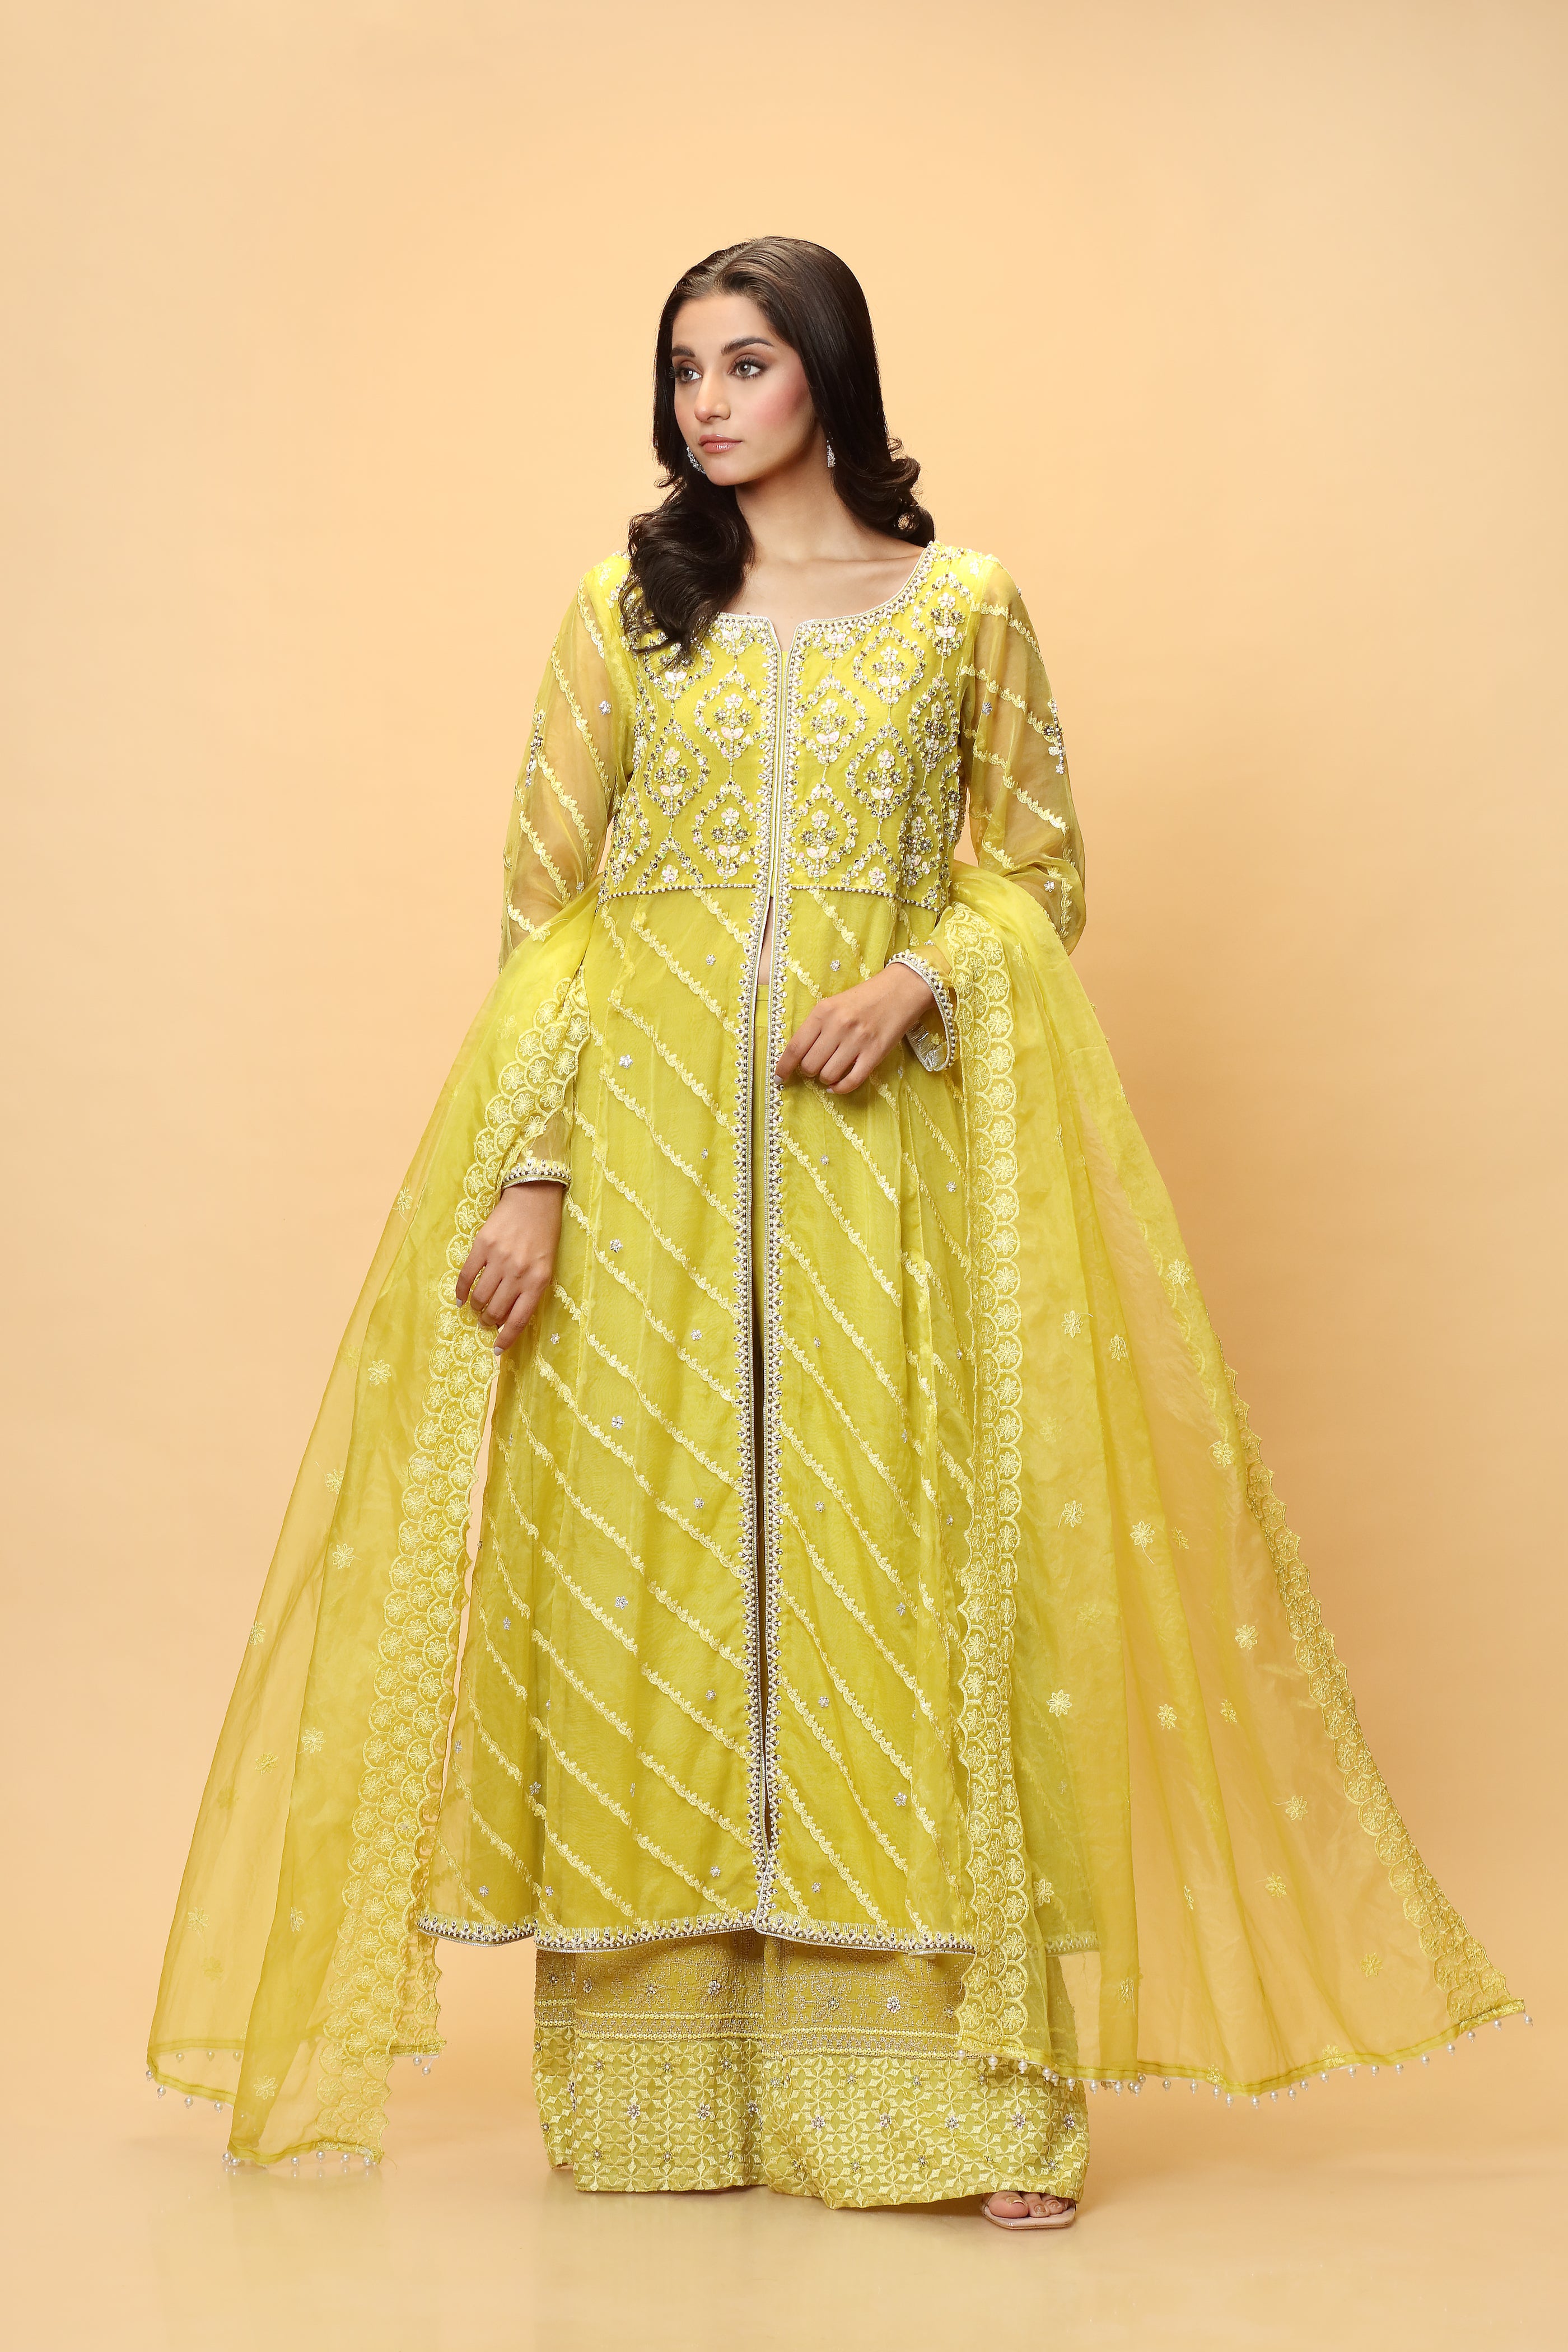 Dress into the elegance of this Peshwas designed from a mix of embroidered organza fabrics.